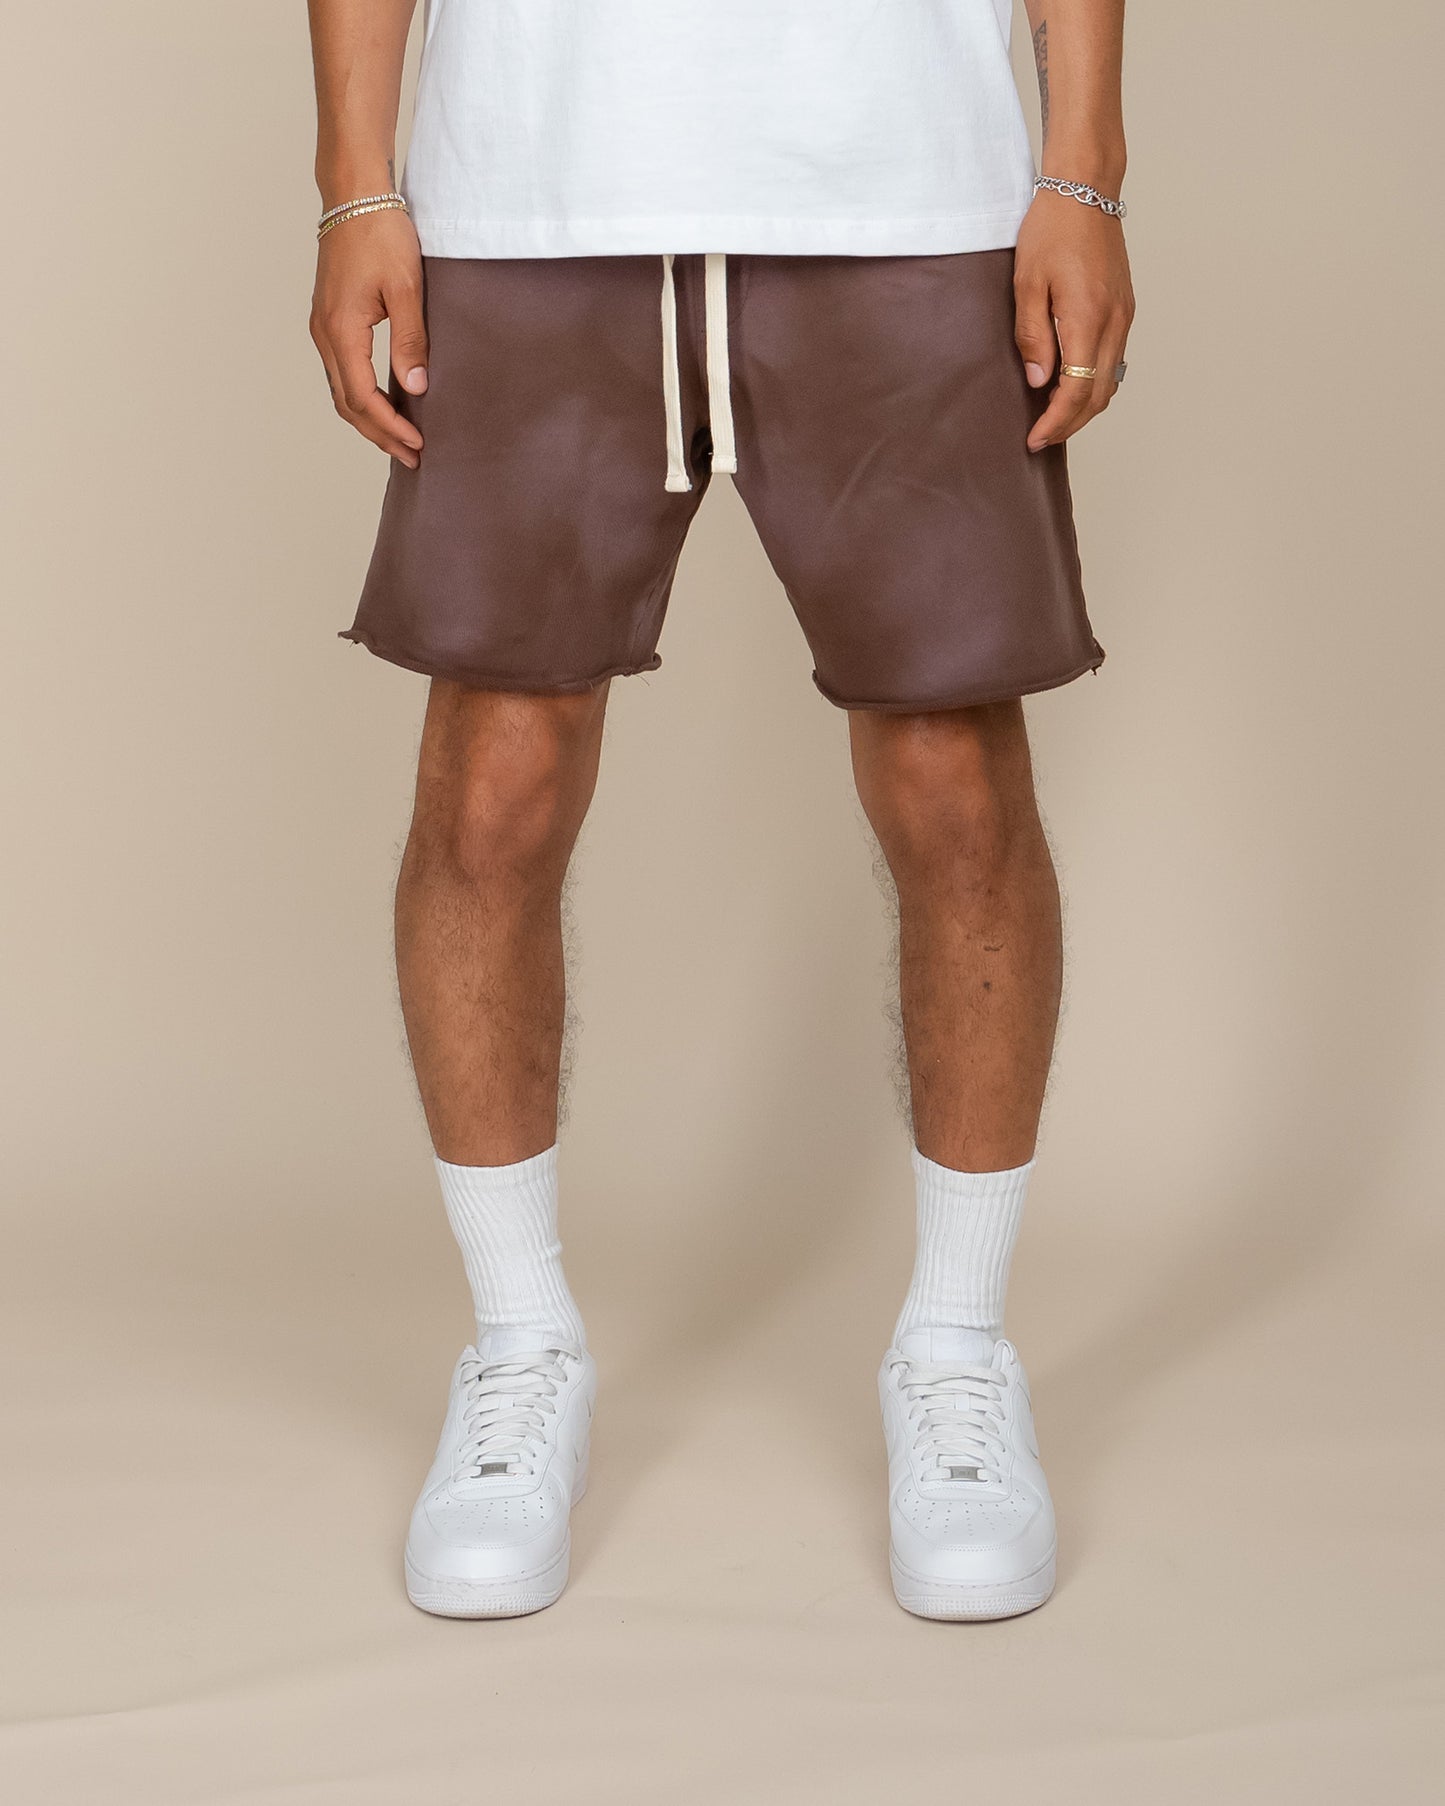 EPTM SUN FADED SHORTS - BROWN